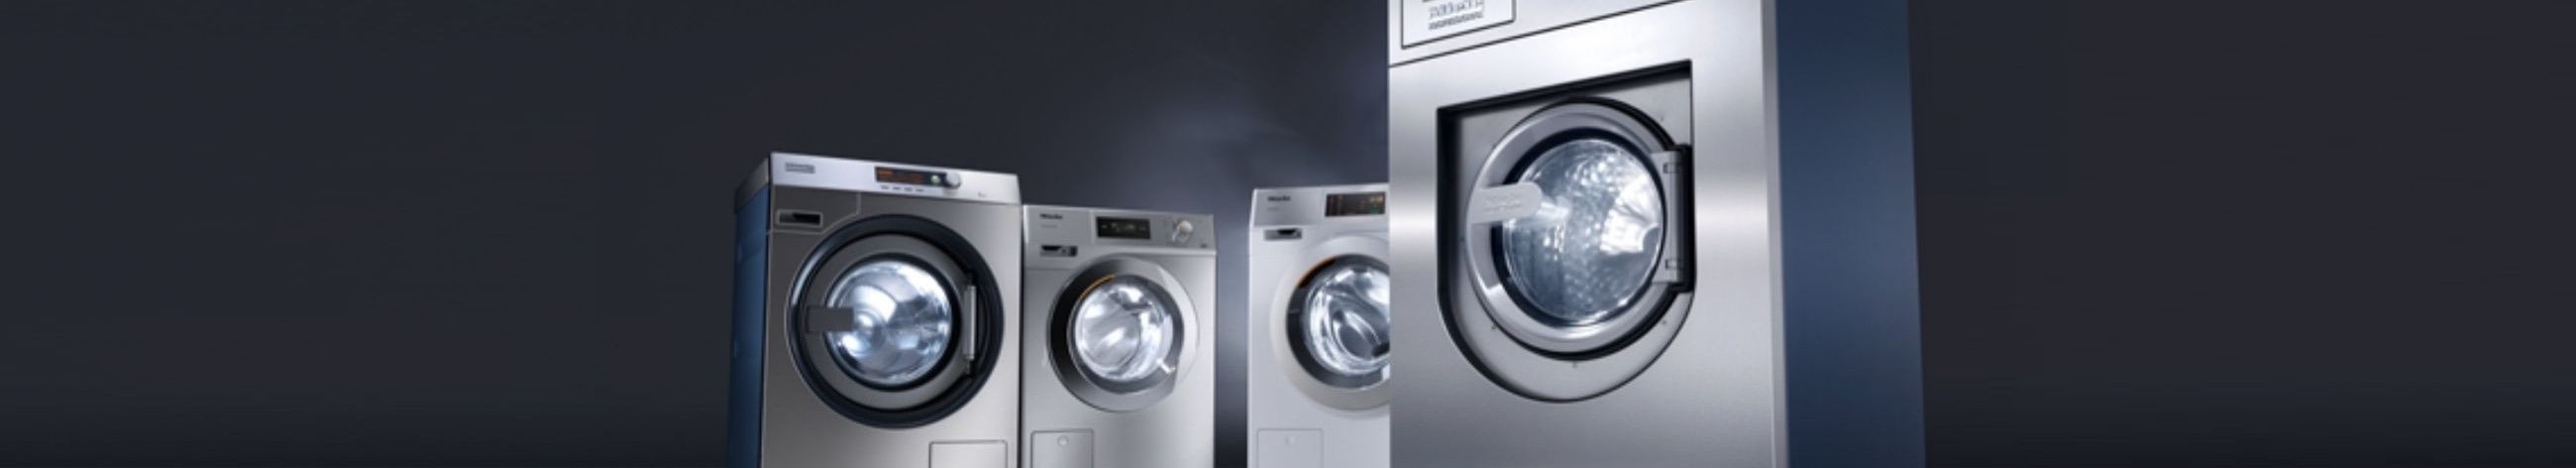 Miele laundry equipment - washing machines, dryers, ironing calenders. Leaders in innovation, representing optimal cleanliness, economy and durability and offering user-friendly solutions.